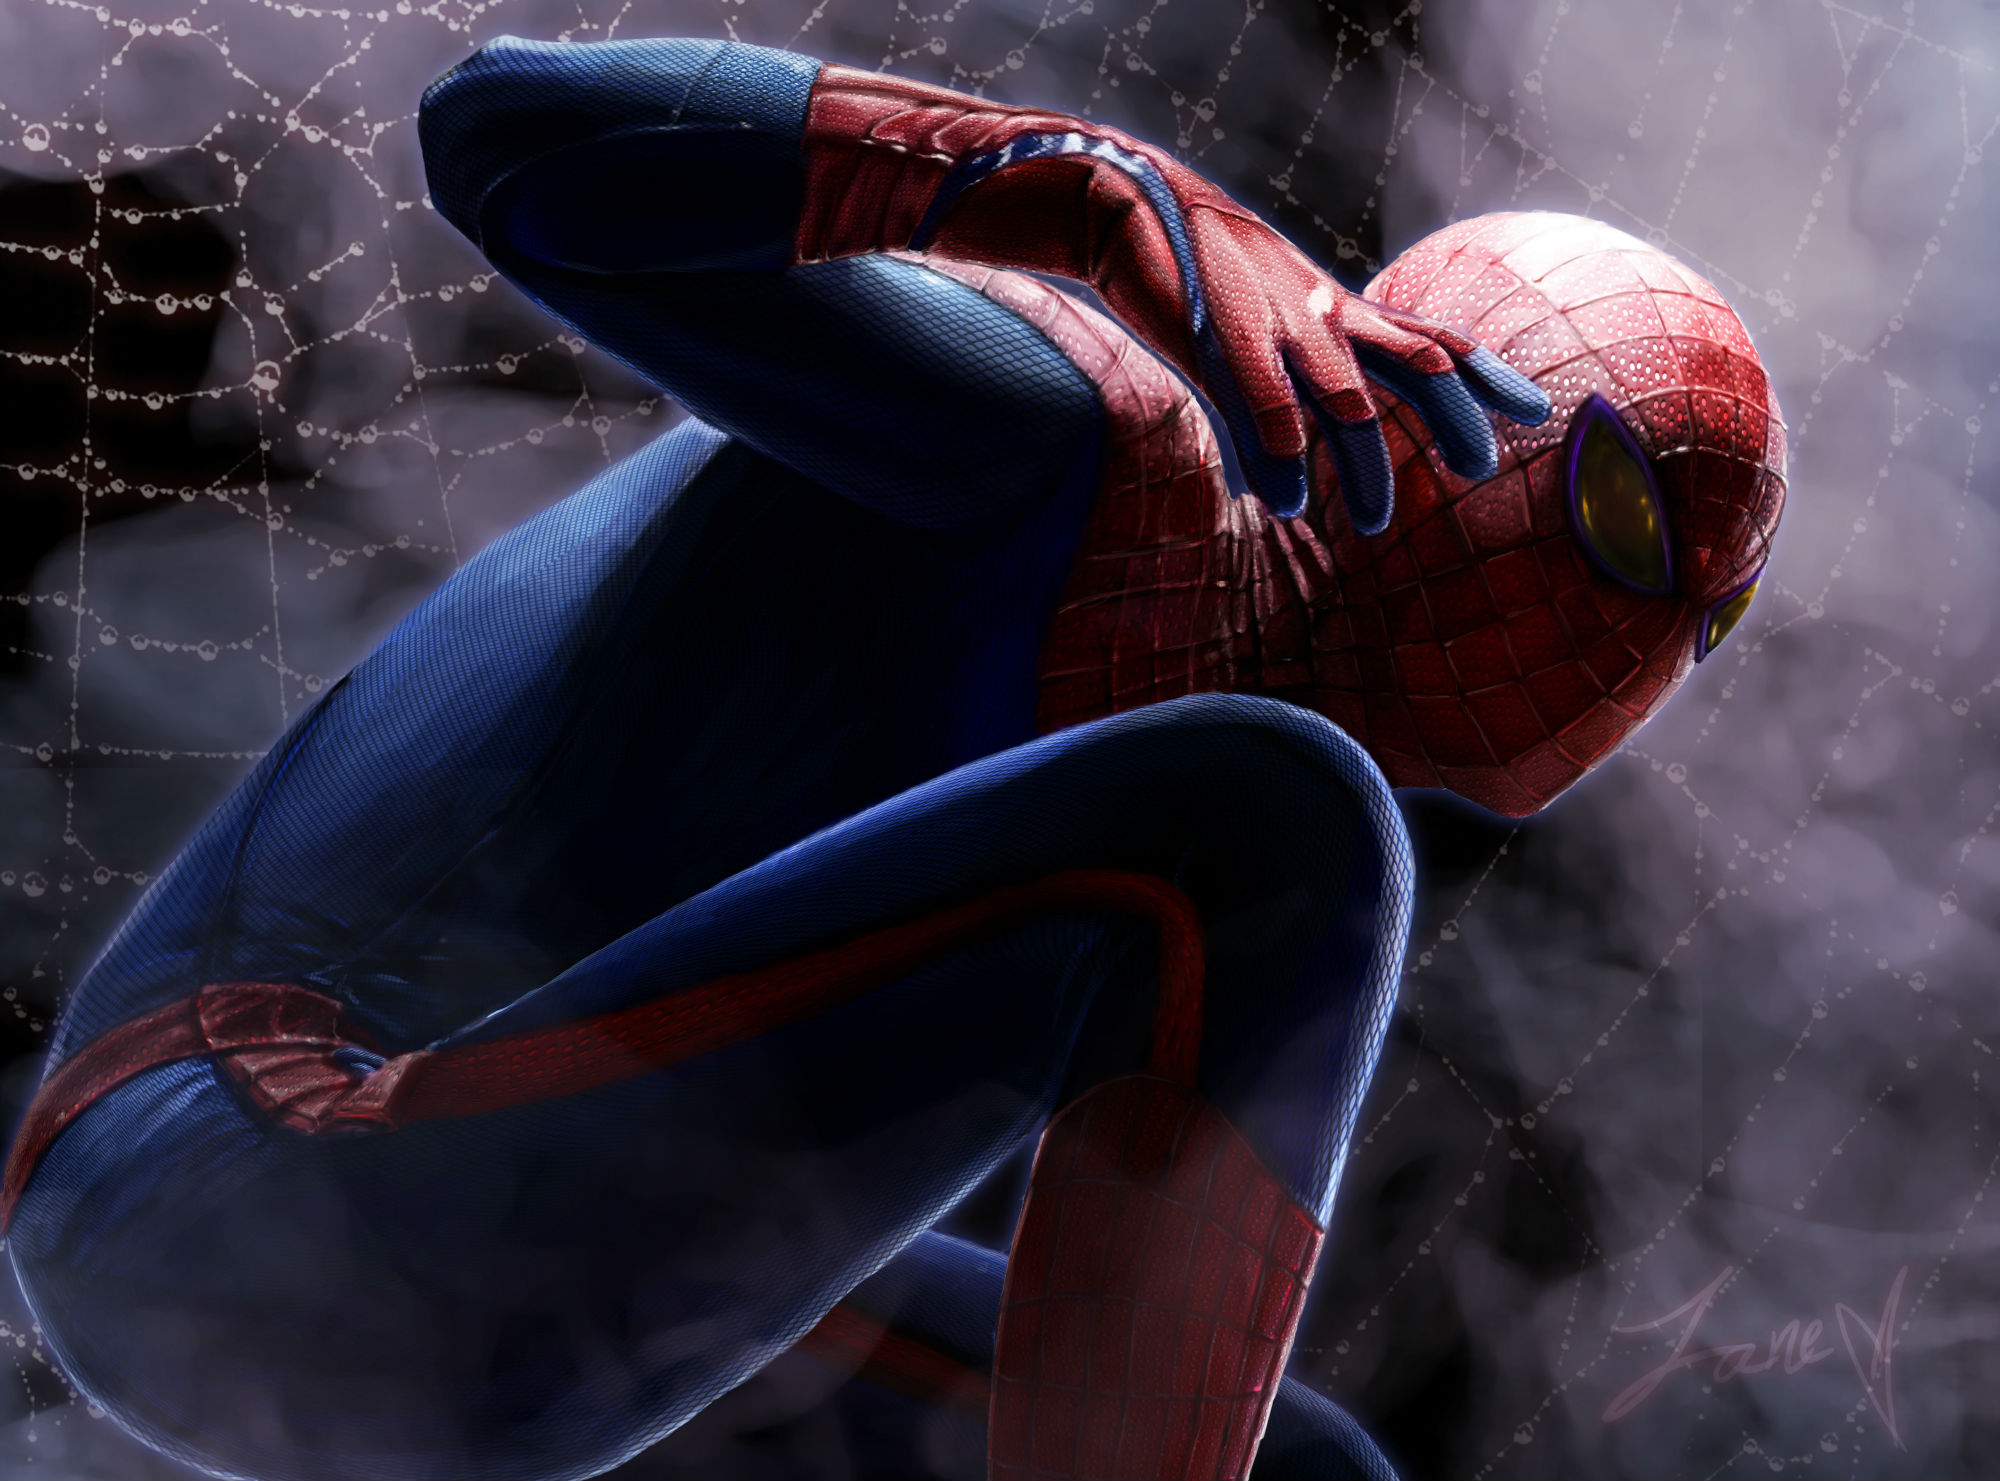 Movie The Amazing Spider-Man HD Wallpaper | Background Image